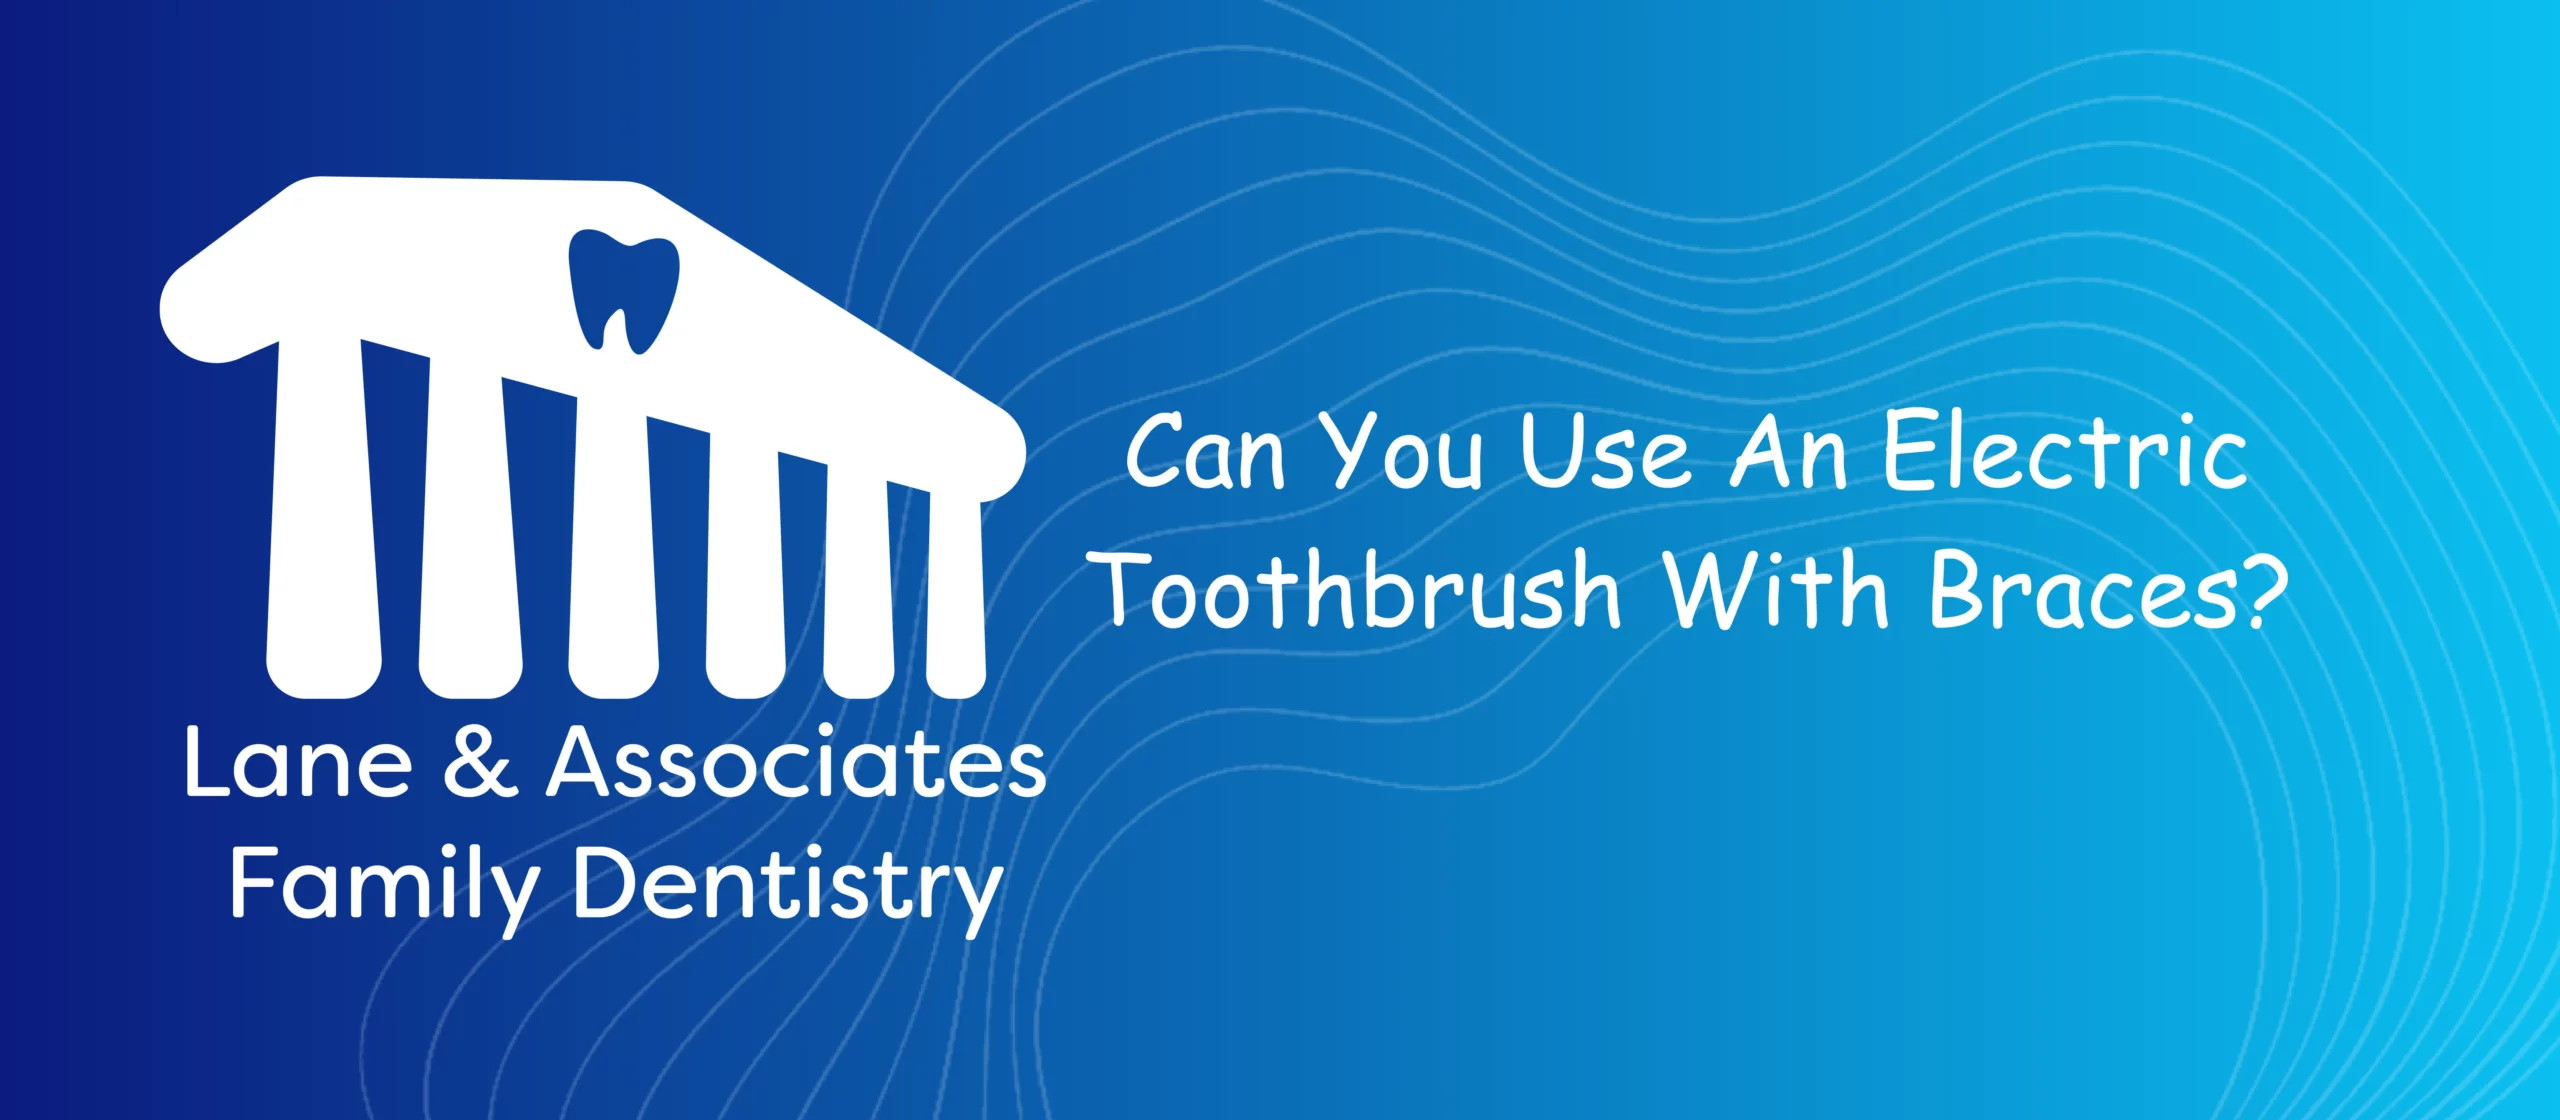 Can You Use An Electric Toothbrush With Braces?